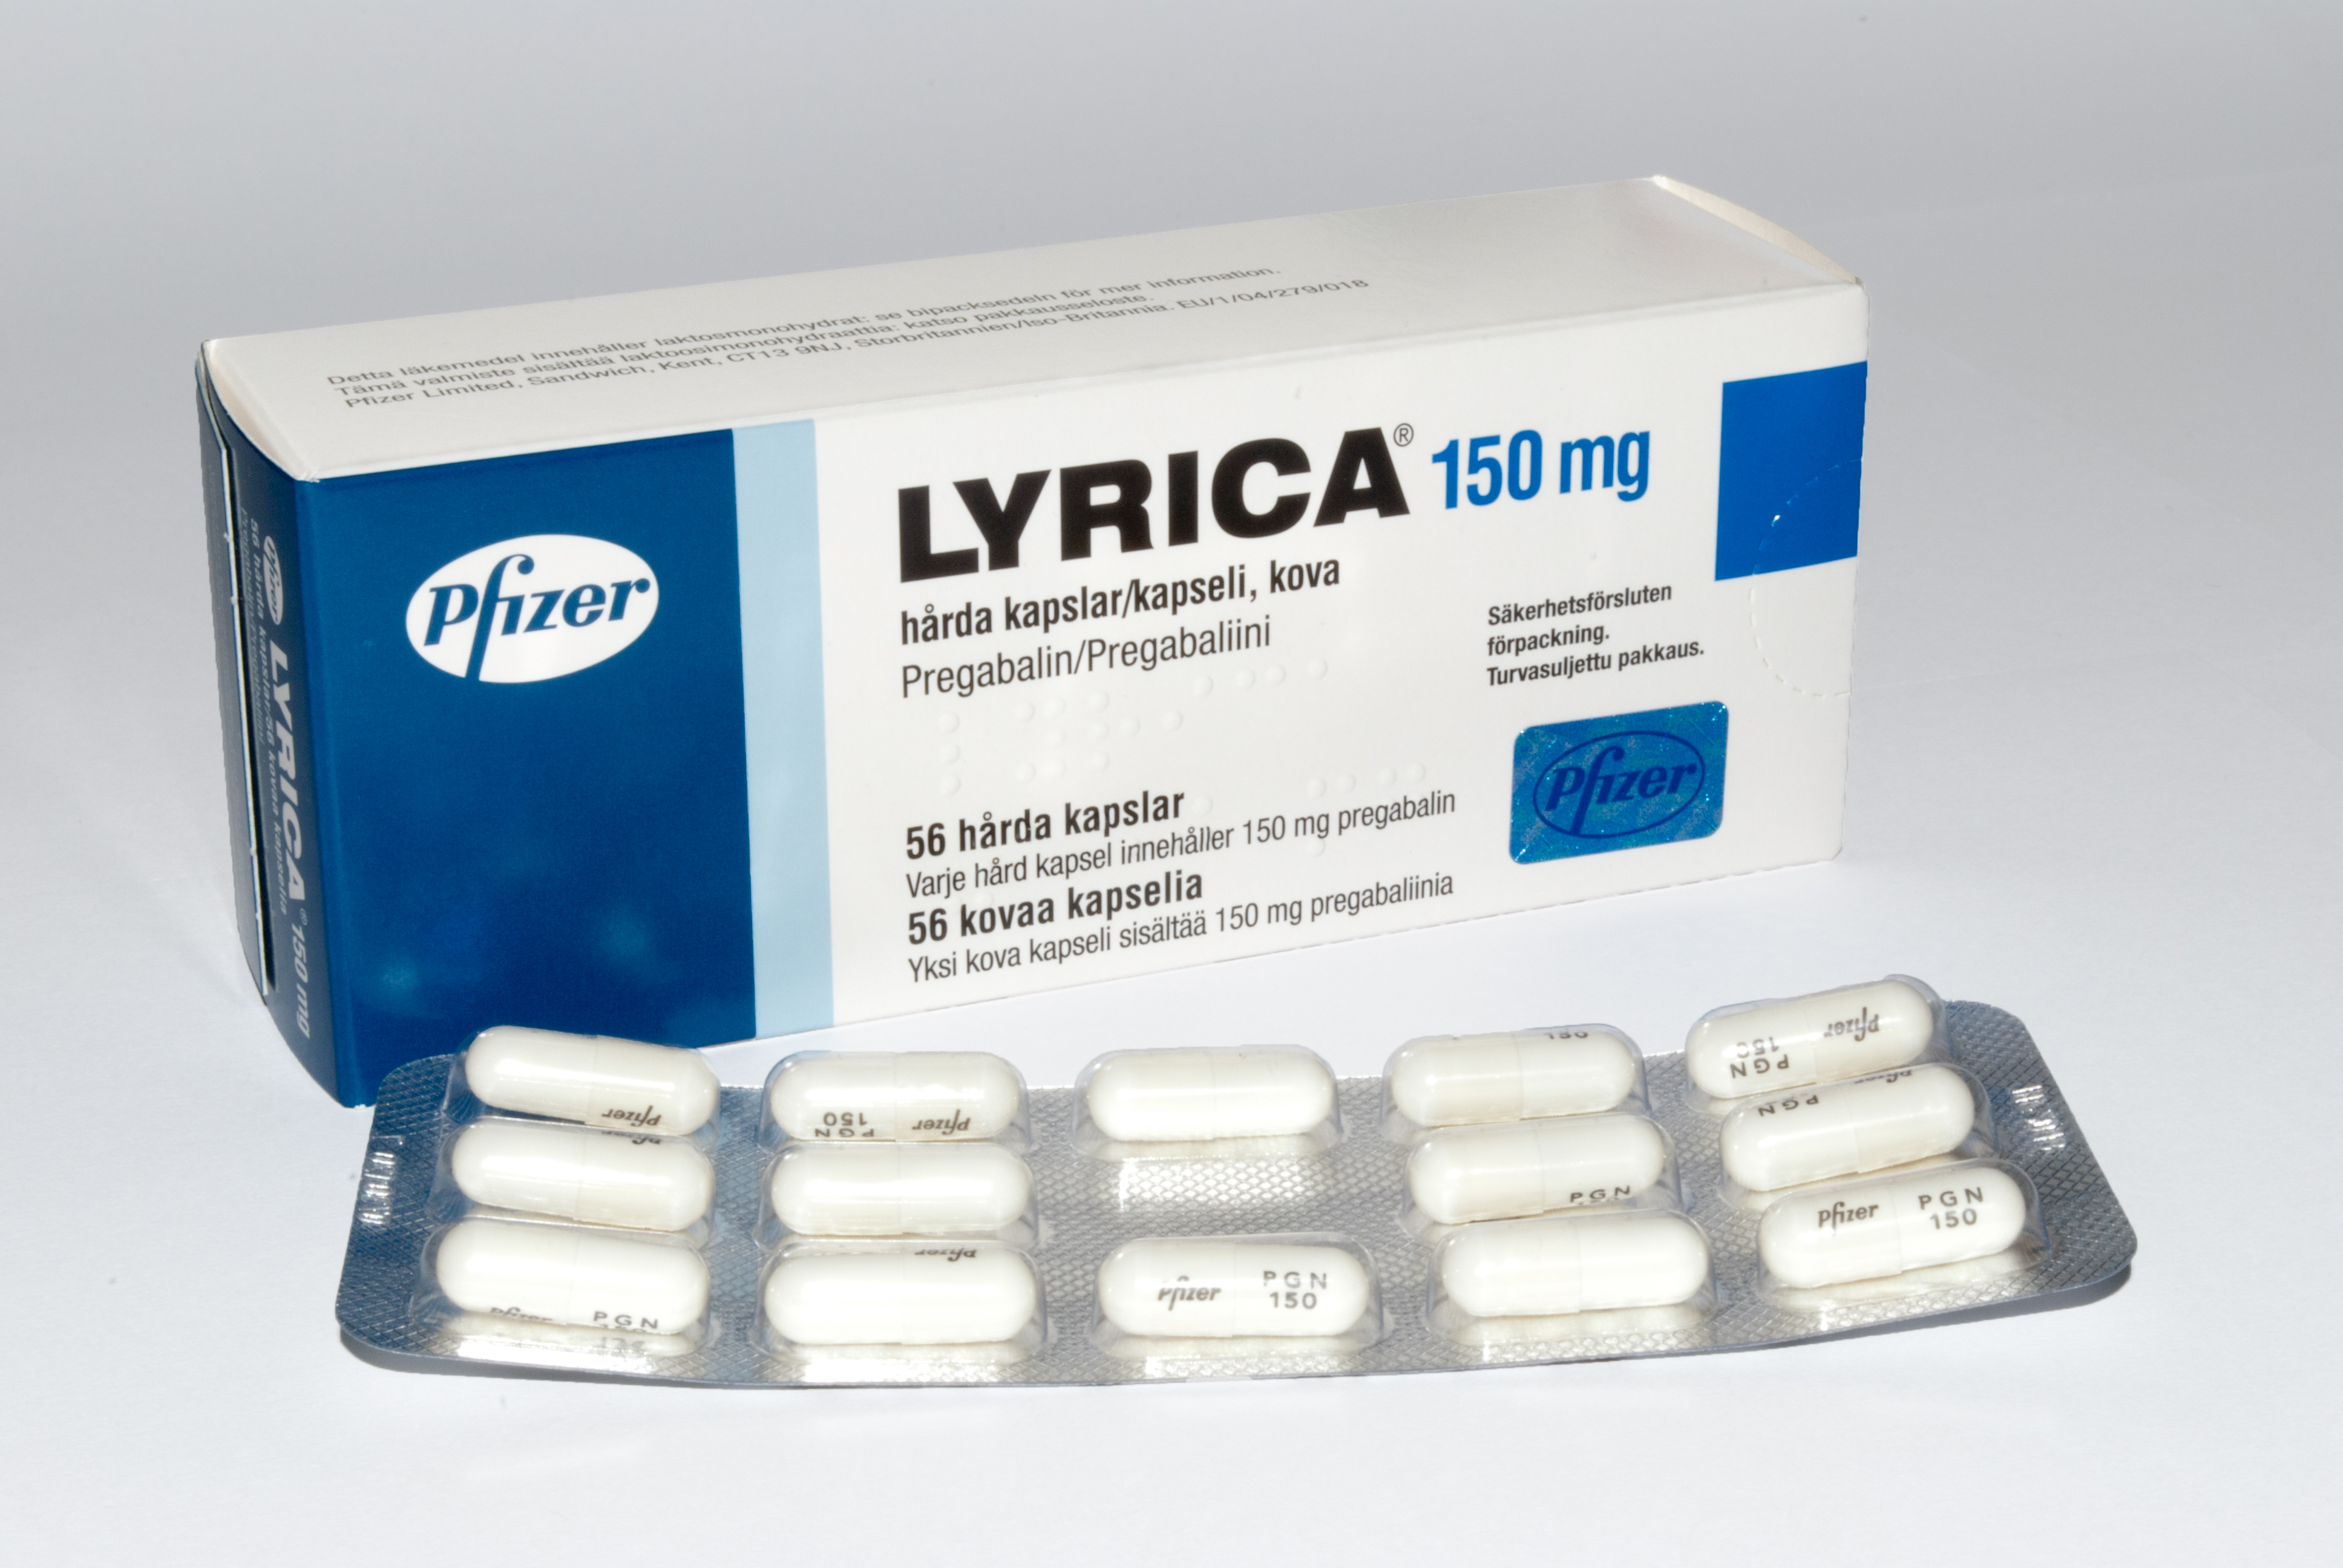 PFizer Lyrica tablets and packaging